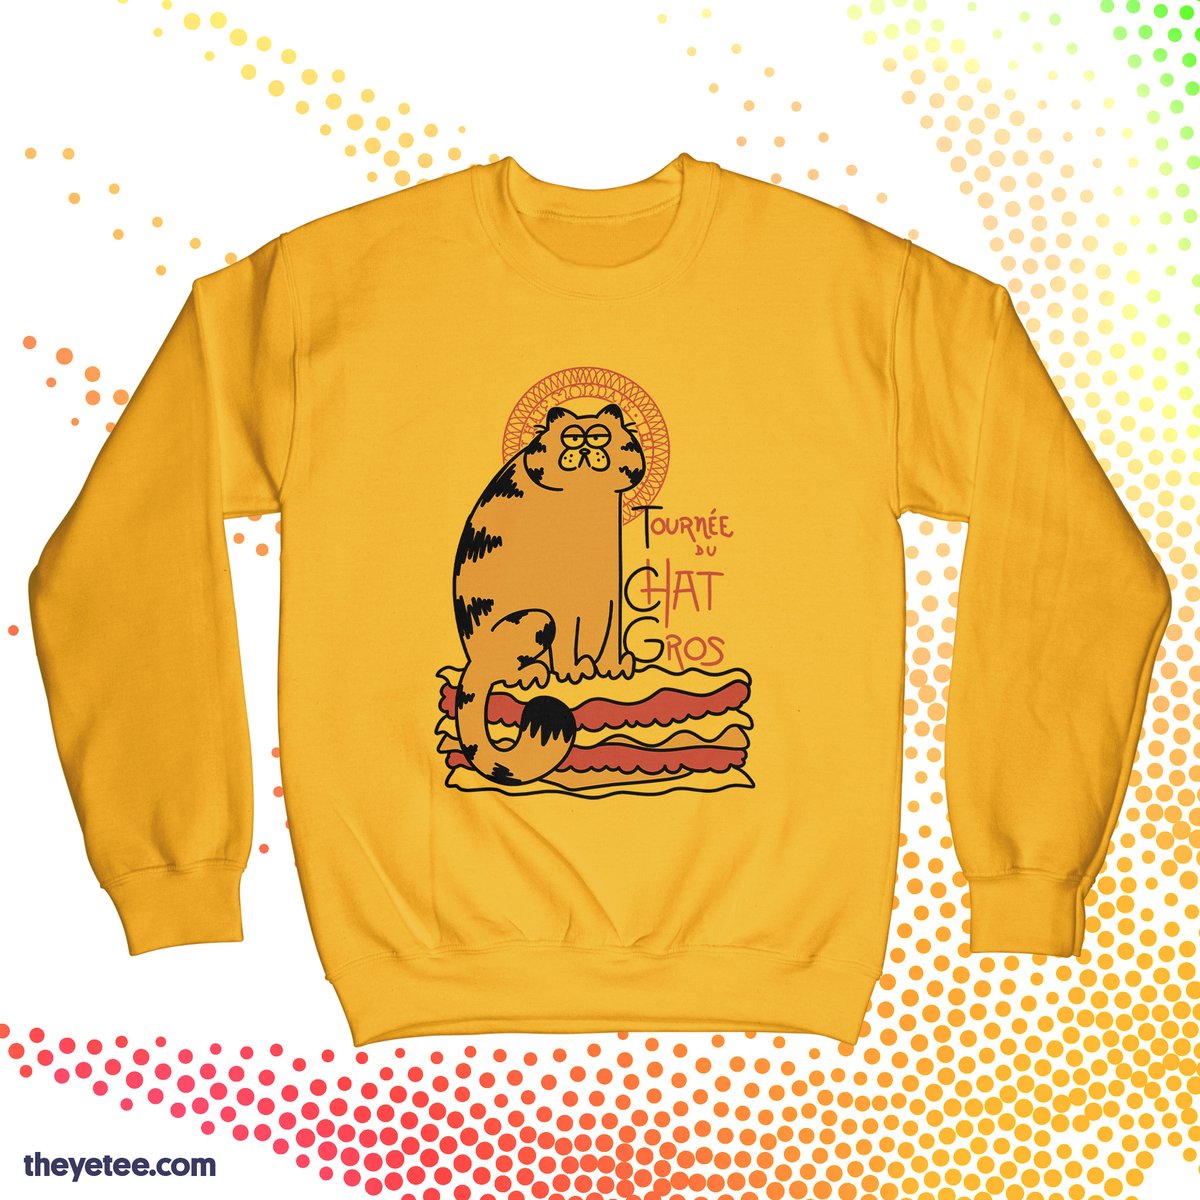 「Today's special is the lasagna, which we」|The Yetee 🌈のイラスト